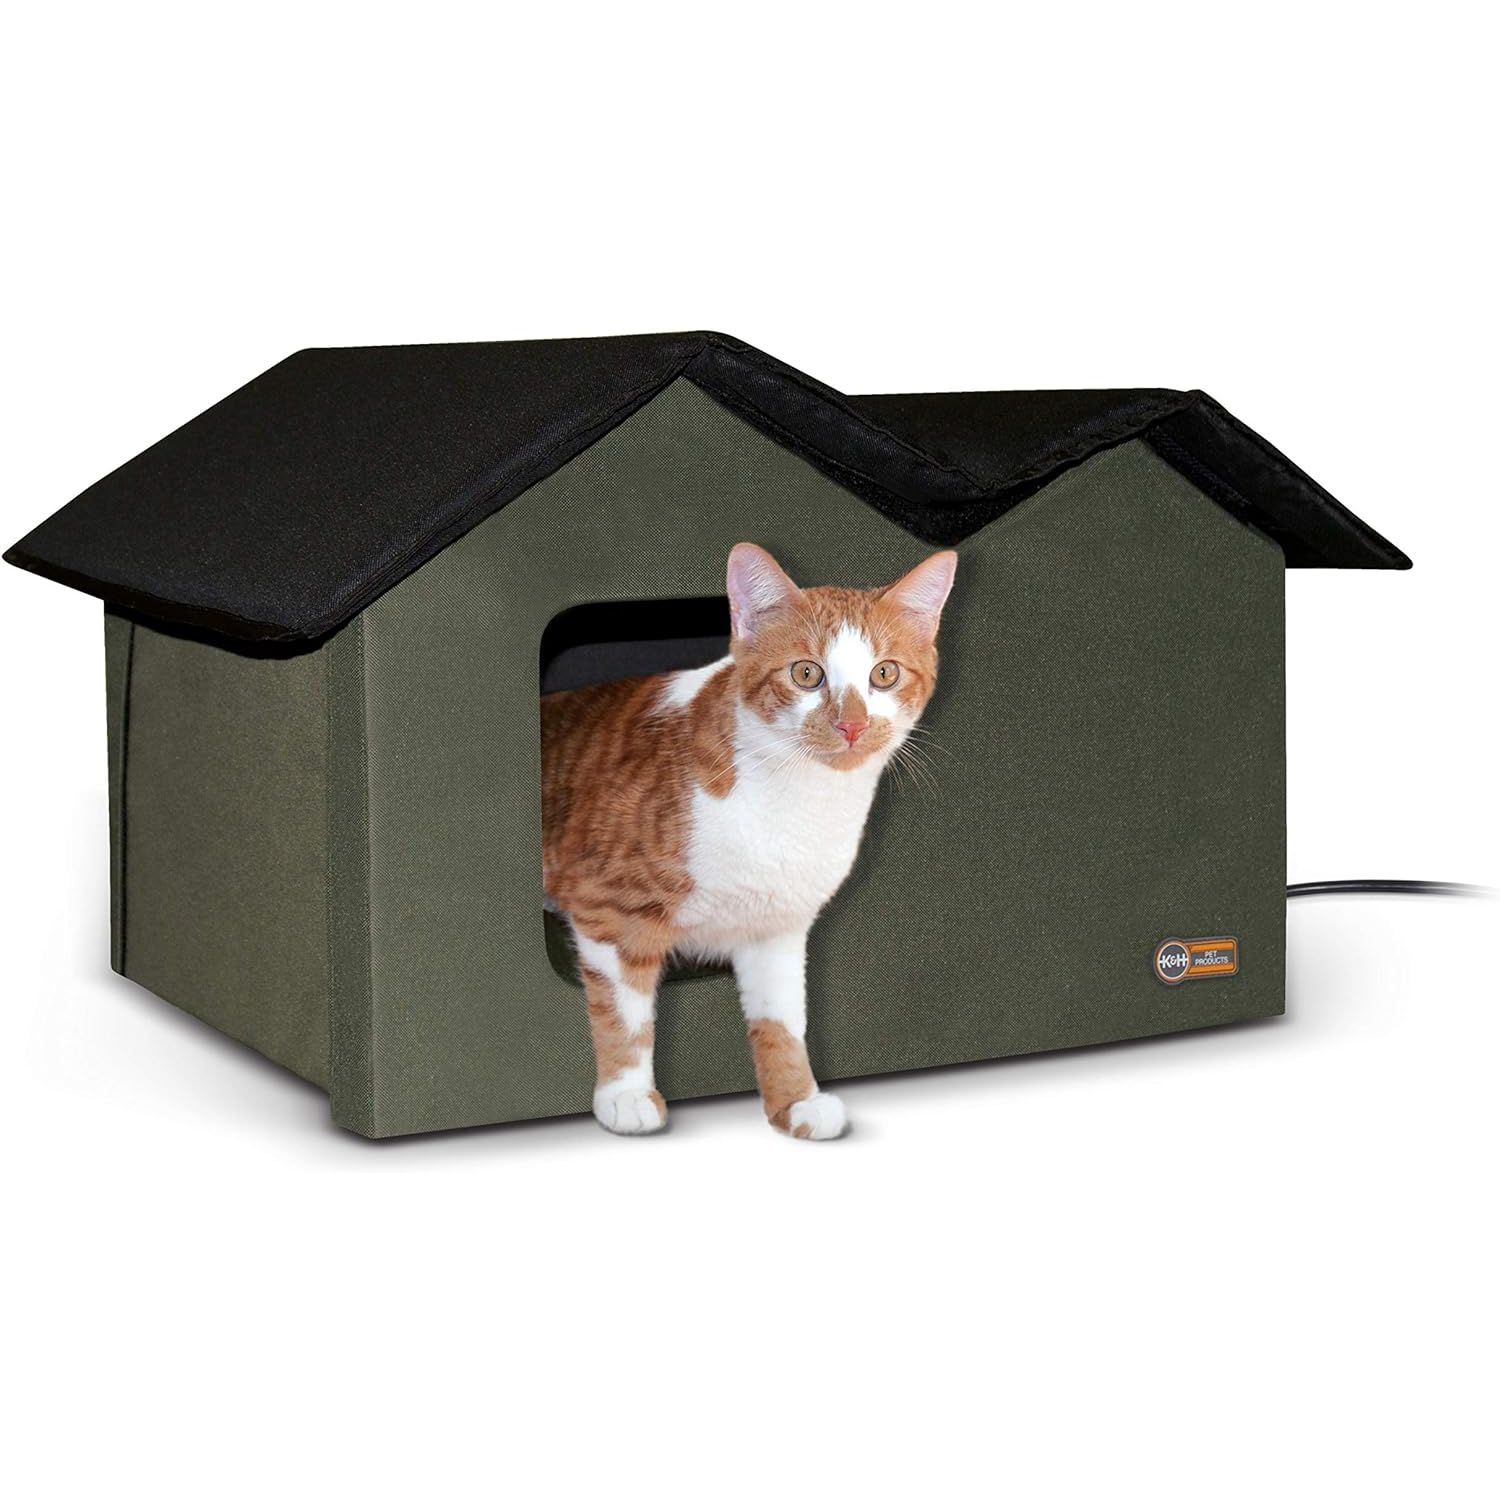 K&H Pet Products Outdoor Heated Cat House Extra-Wide Cat Shelter for Two, Olive, 26.5 X 21.5 X 15.5 Inches new